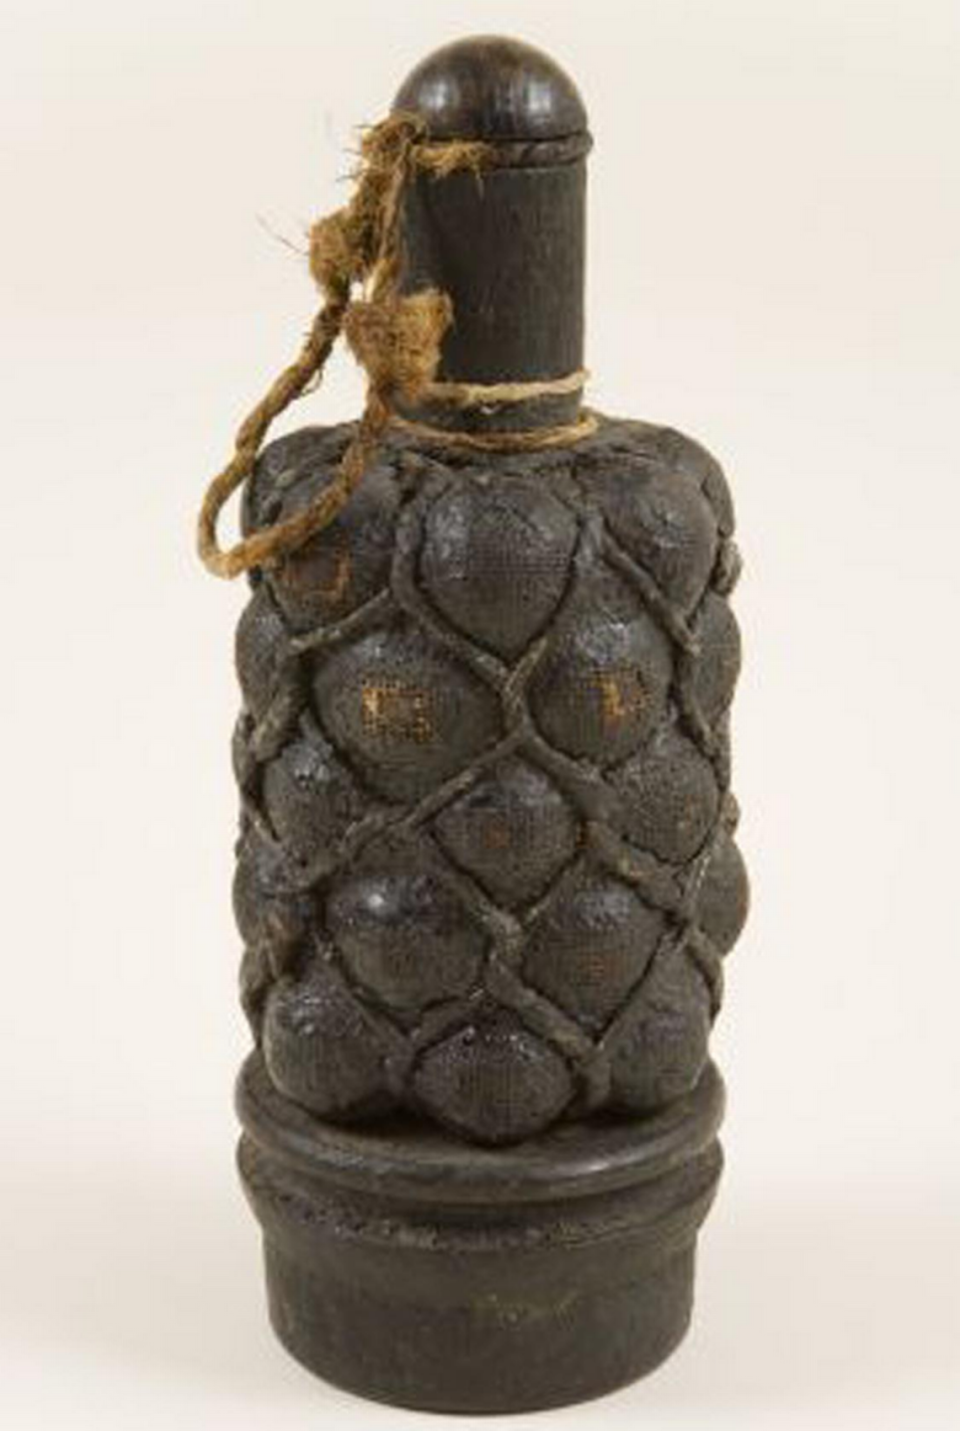 Grapeshot, a type of ammunition, was found at the site.